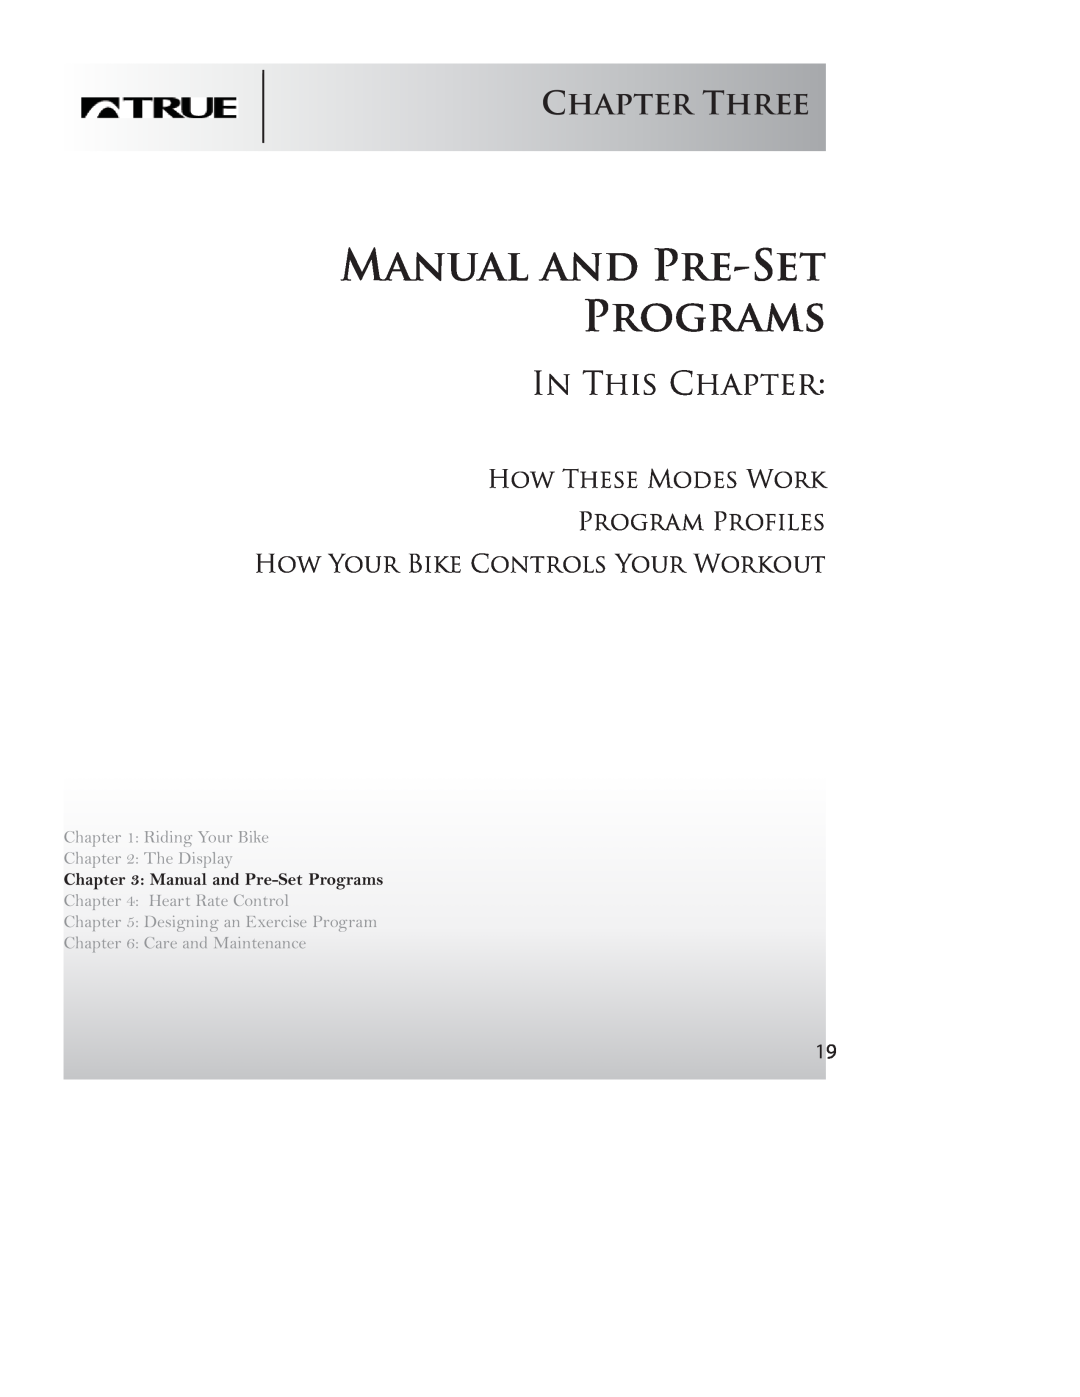 True Fitness P100, PS50 Manual and Pre-Set Programs, Chapter Three, How These Modes Work Program Profiles, In This Chapter 